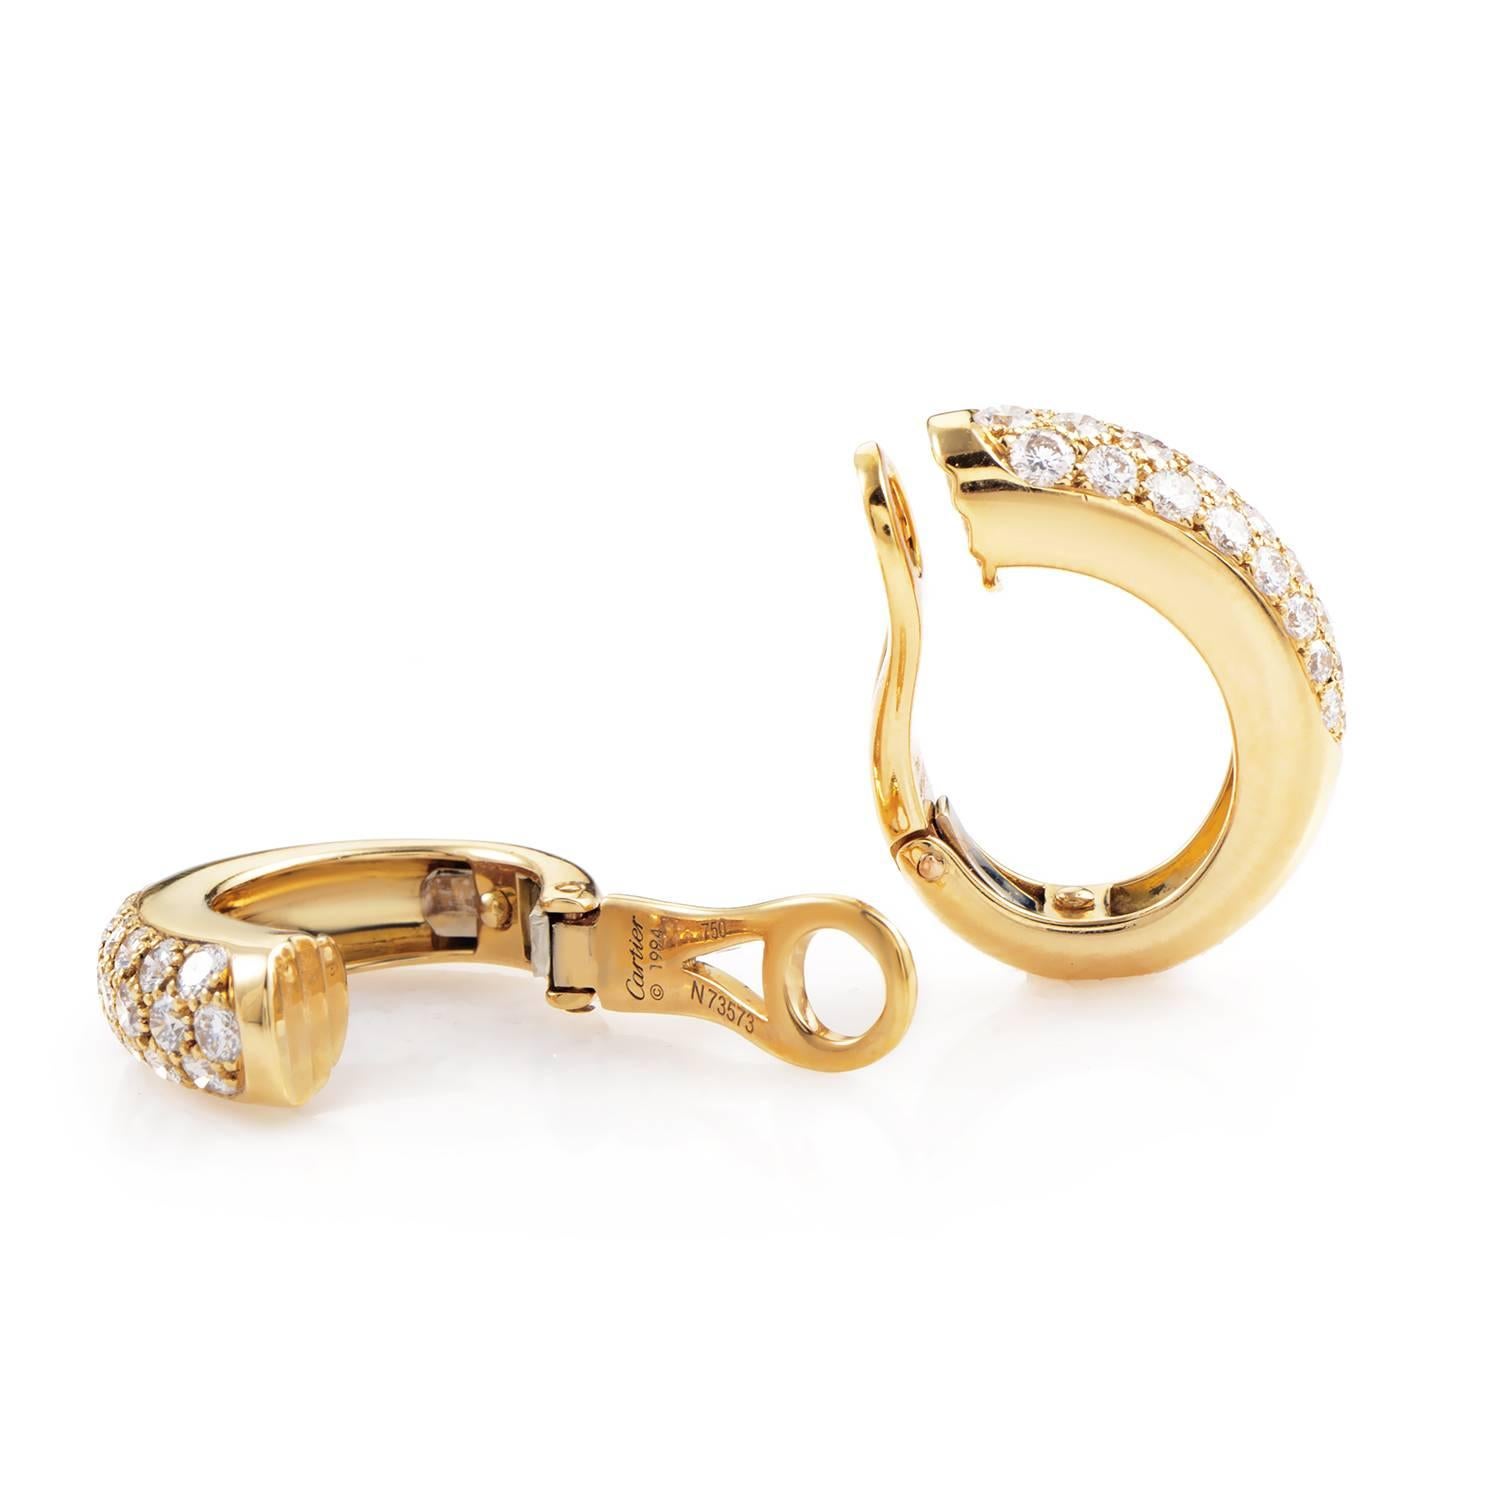 Simple and sweet are the perfect words to describe this pair of clip-on earrings from Cartier. The earrings are made of 18K yellow gold and are set with a 1.50ct partial diamond pave.

Included Items: Manufacturer's Box